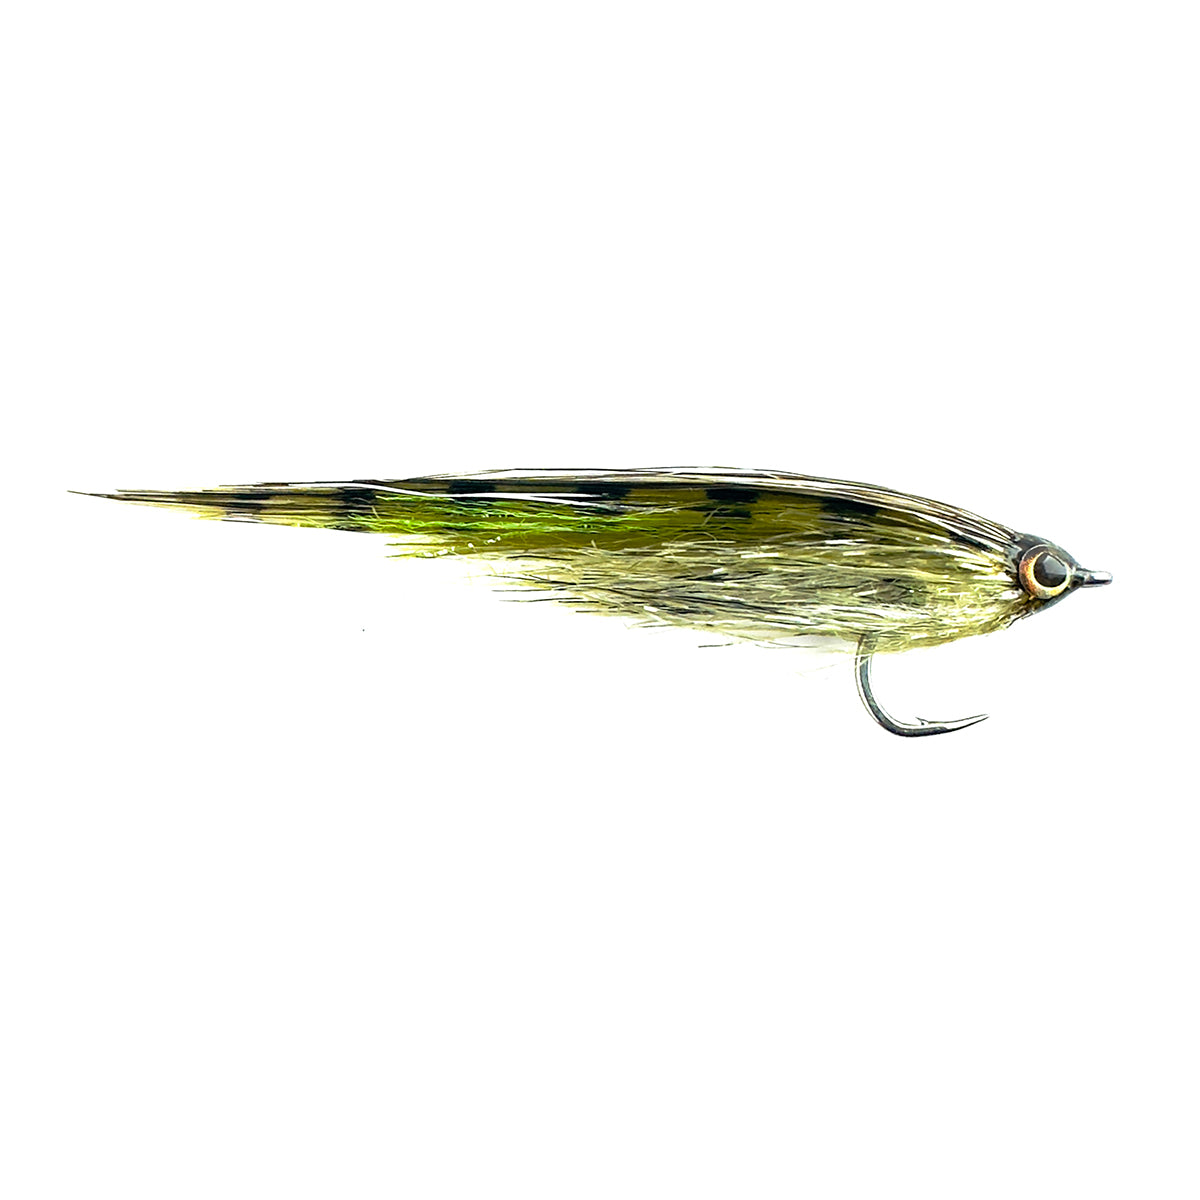 GHOST MINNOW - OLIVE